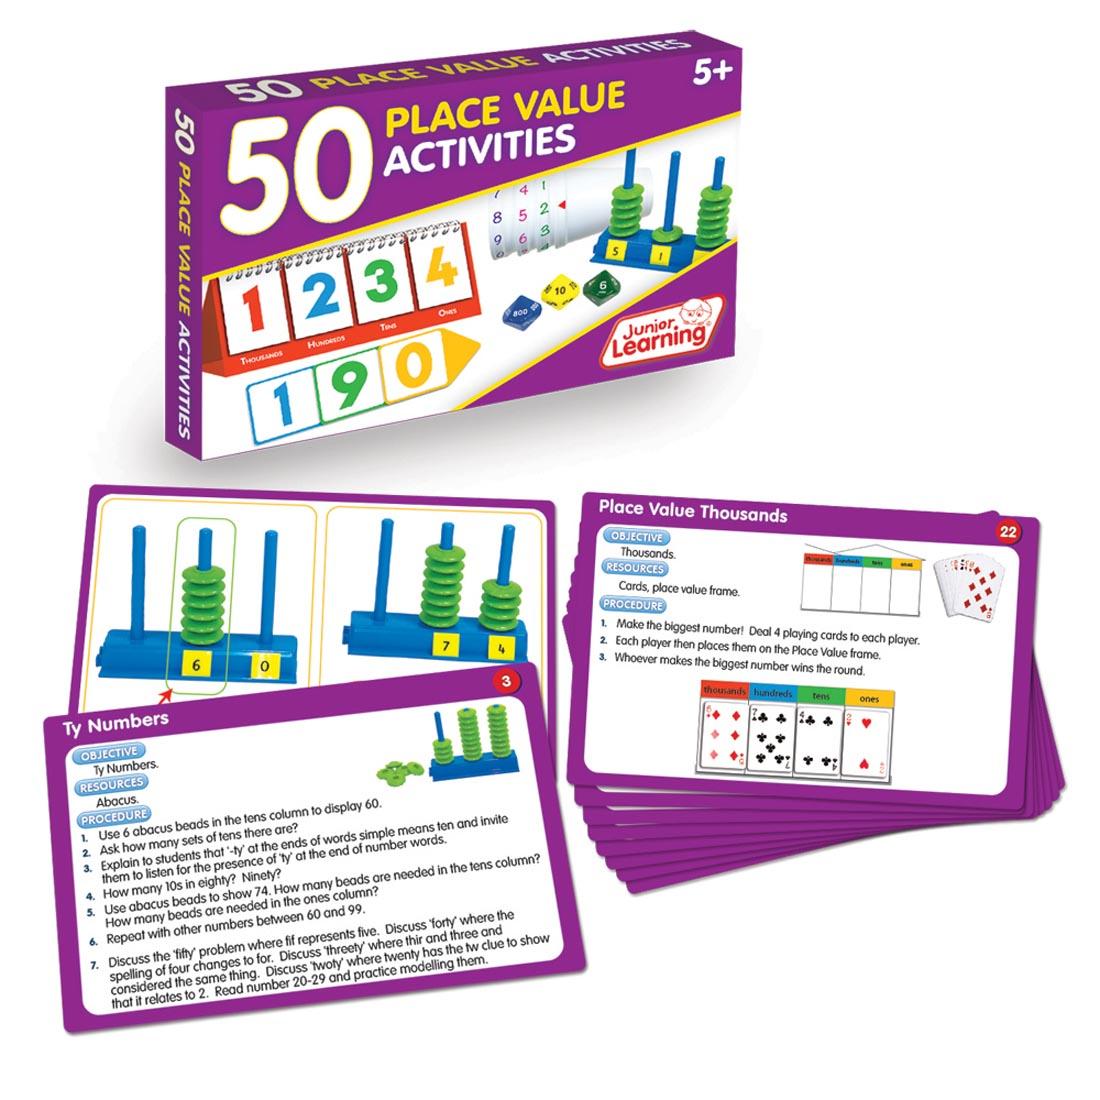 50 Place Value Activities by Junior Learning